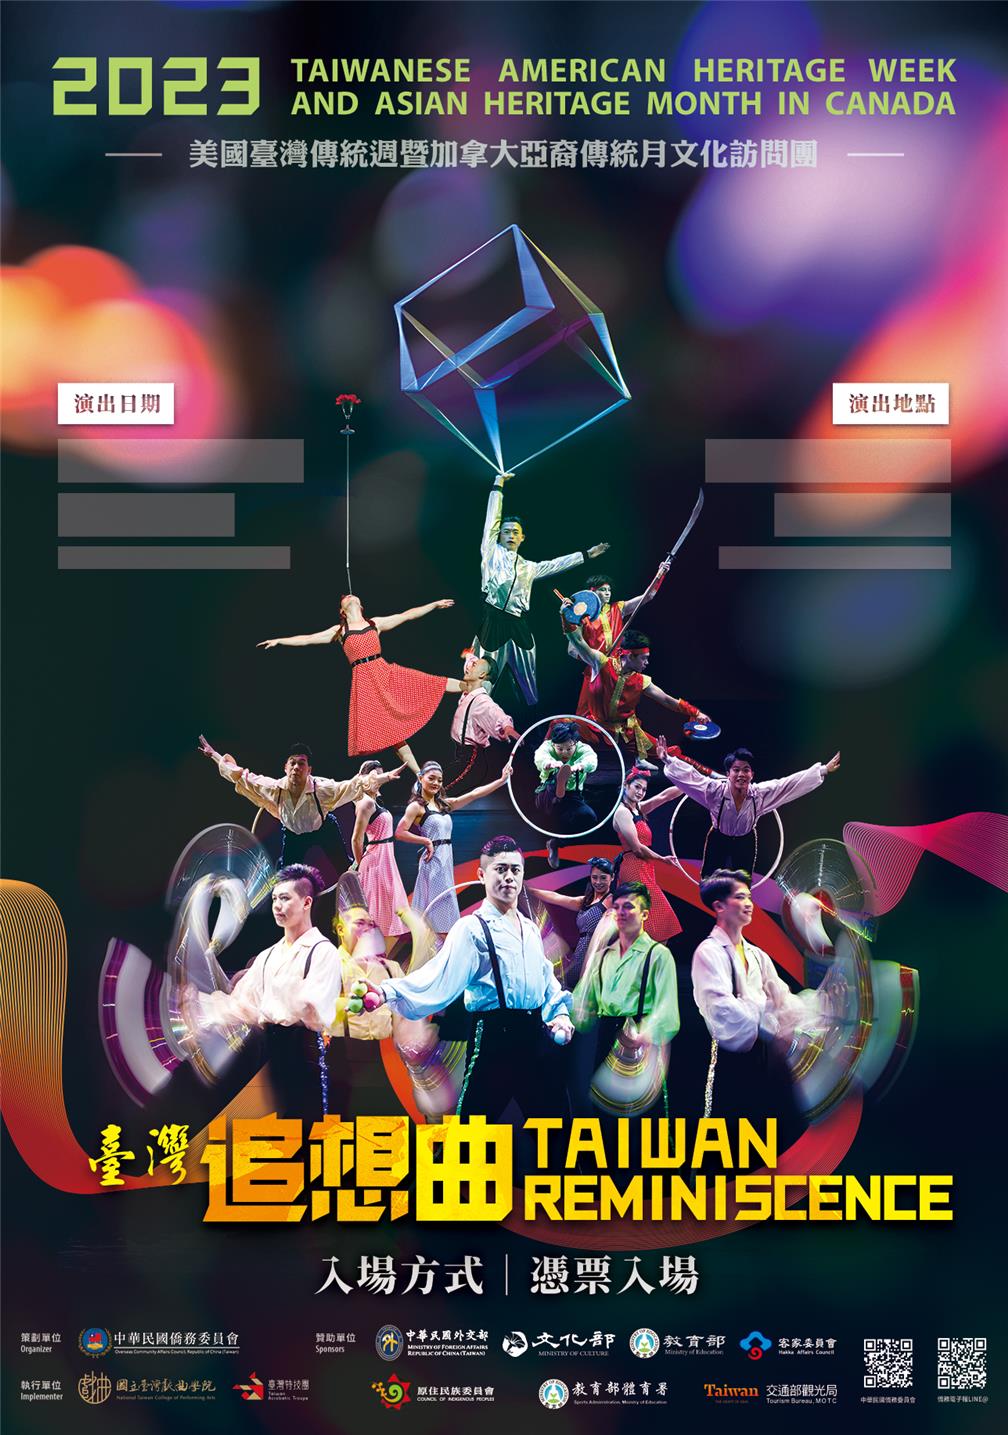 2023 Taiwanese American Heritage Week & Asian Heritage Month in Canada West Itinerary- National Taiwan College of Performing Arts